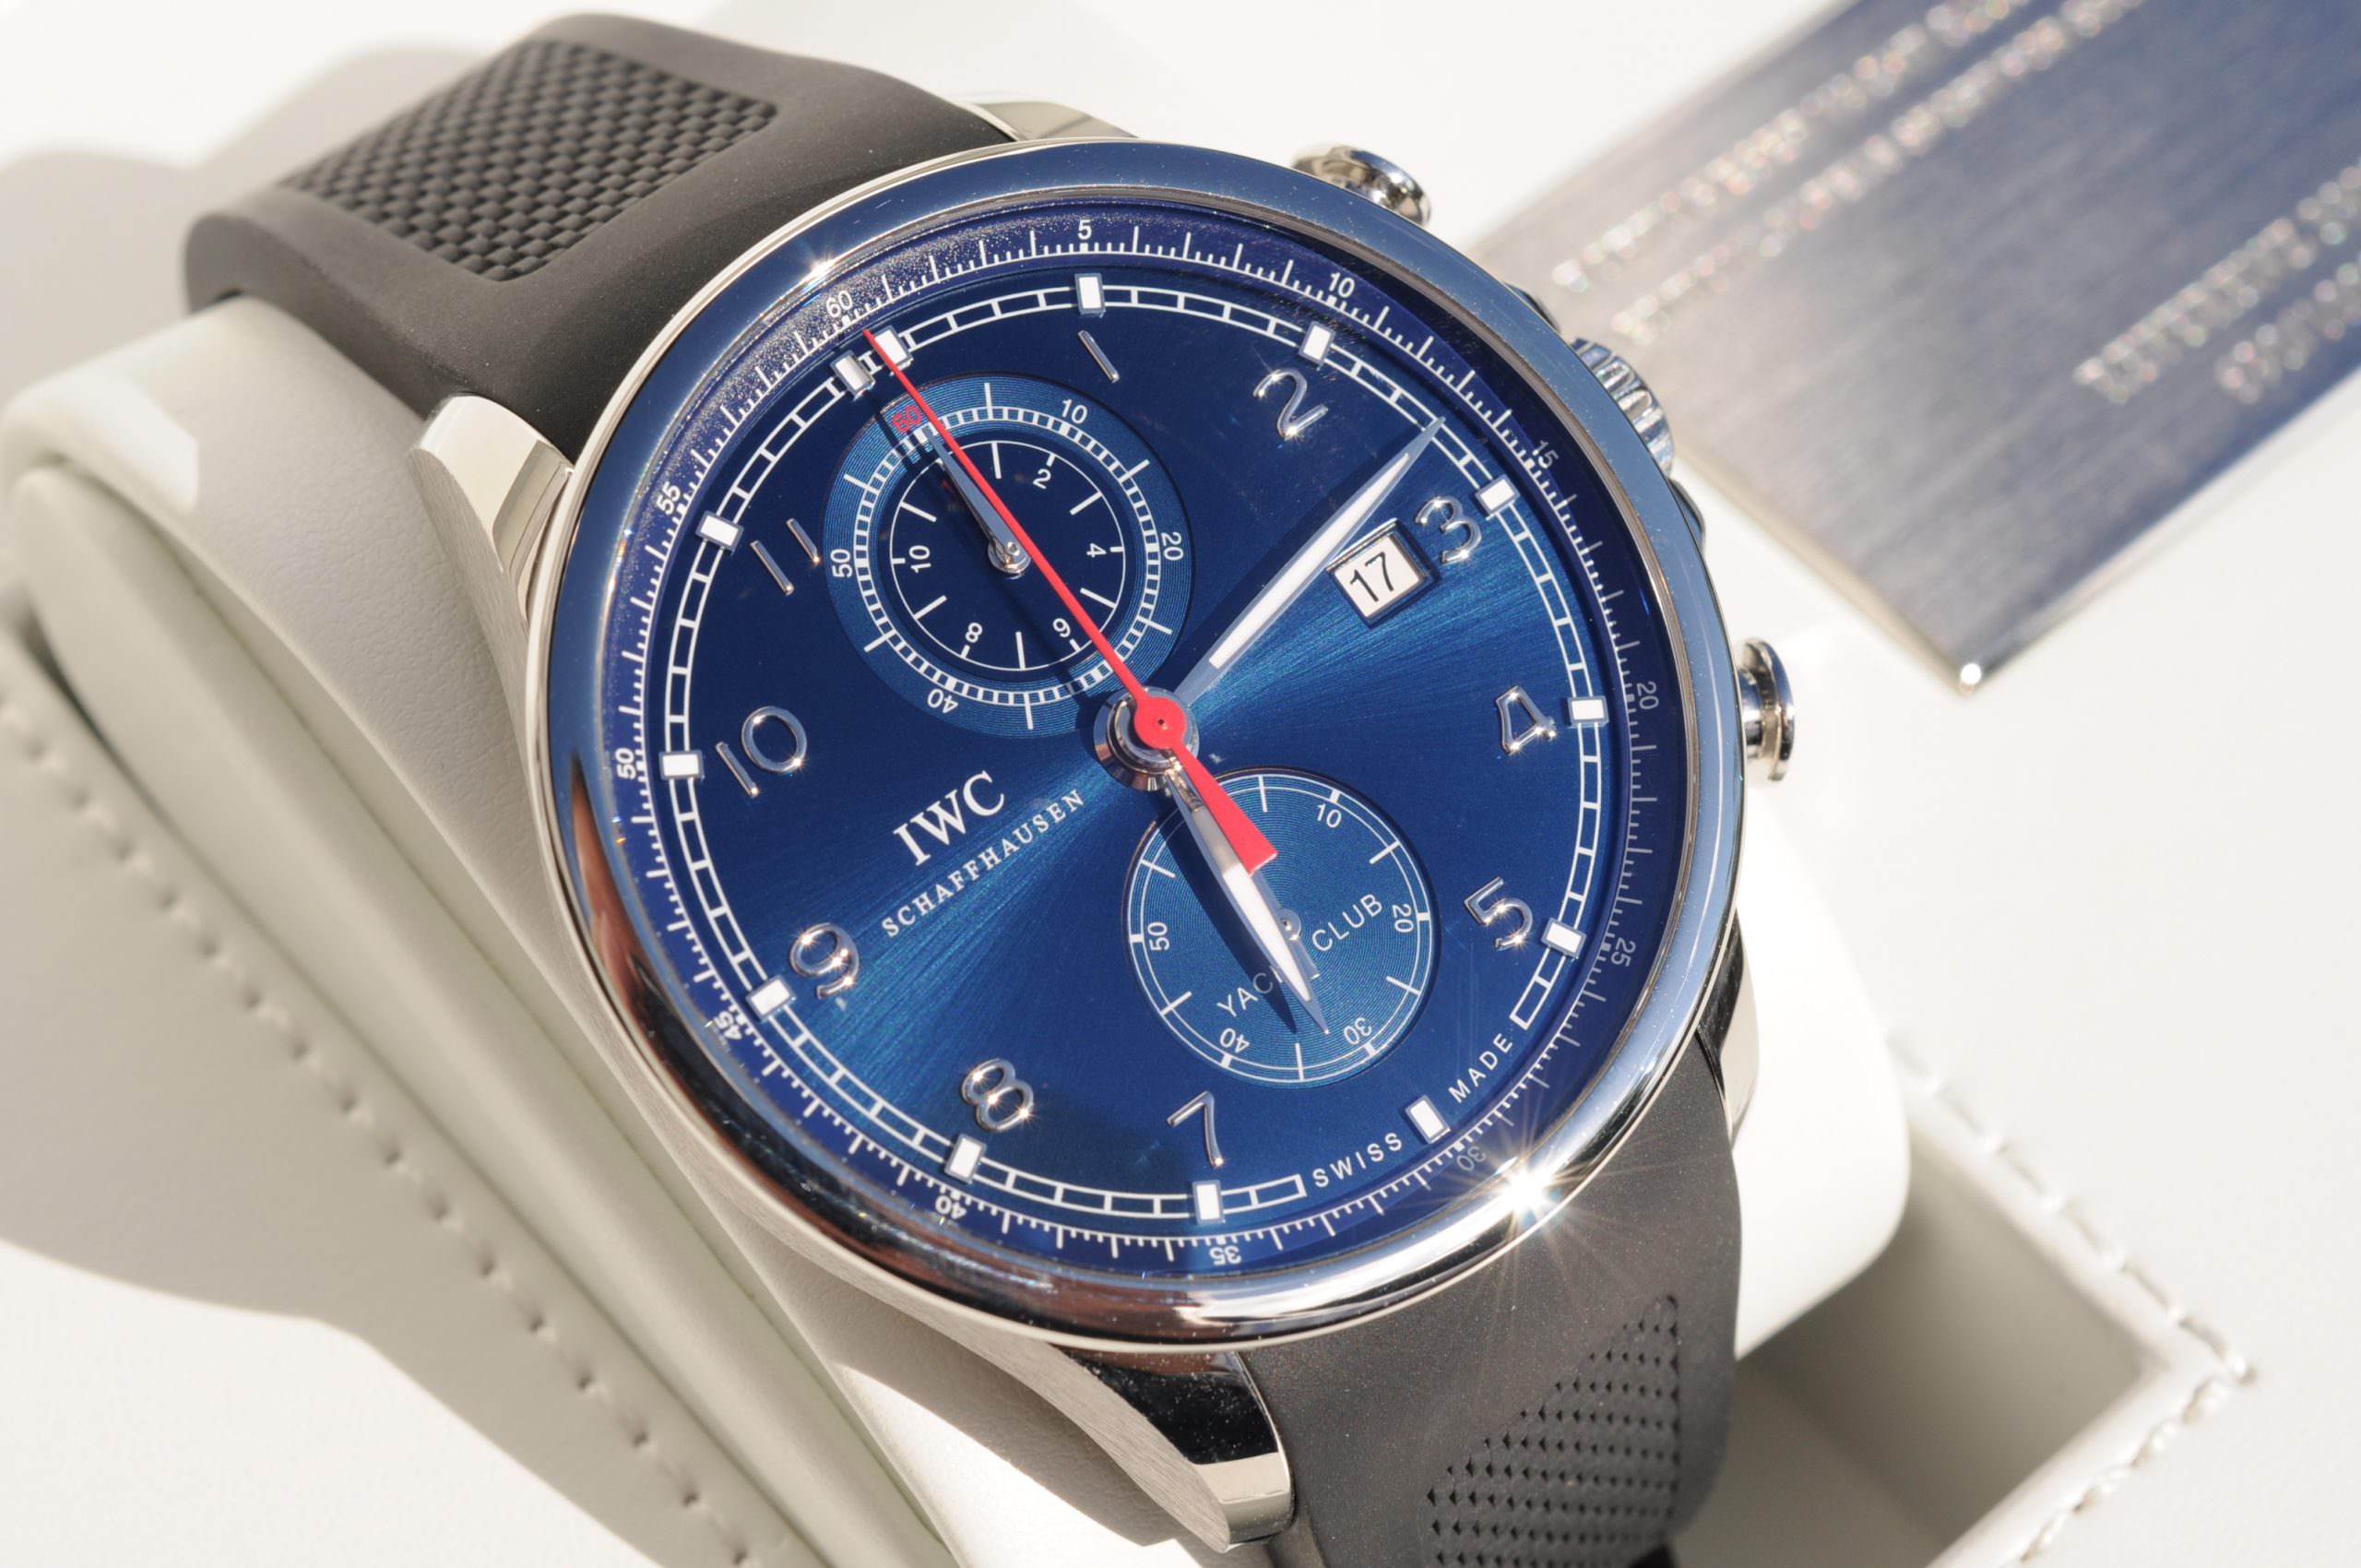 iwc yacht club review